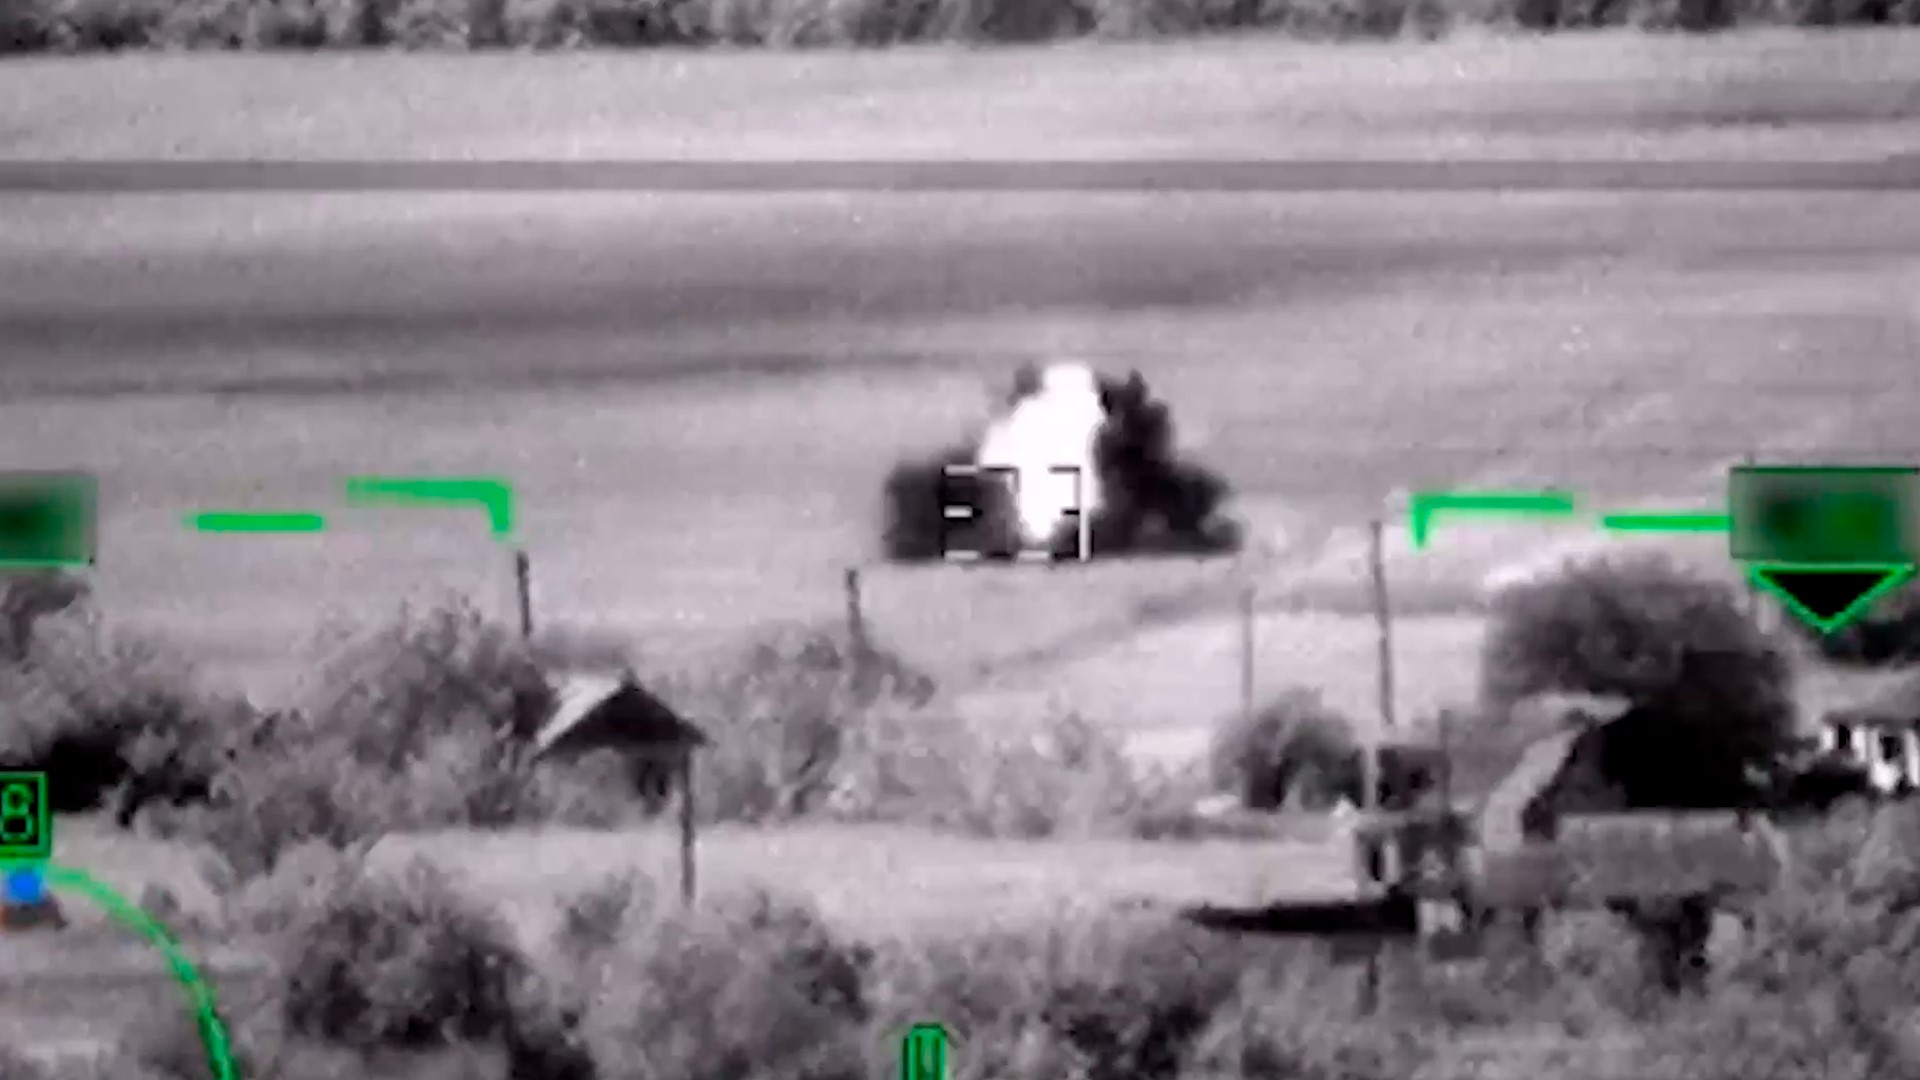 The video was shown extensively by Russian state-controlled broadcasters and news sites, which said it was recorded from the thermal imaging system of a helicopter.